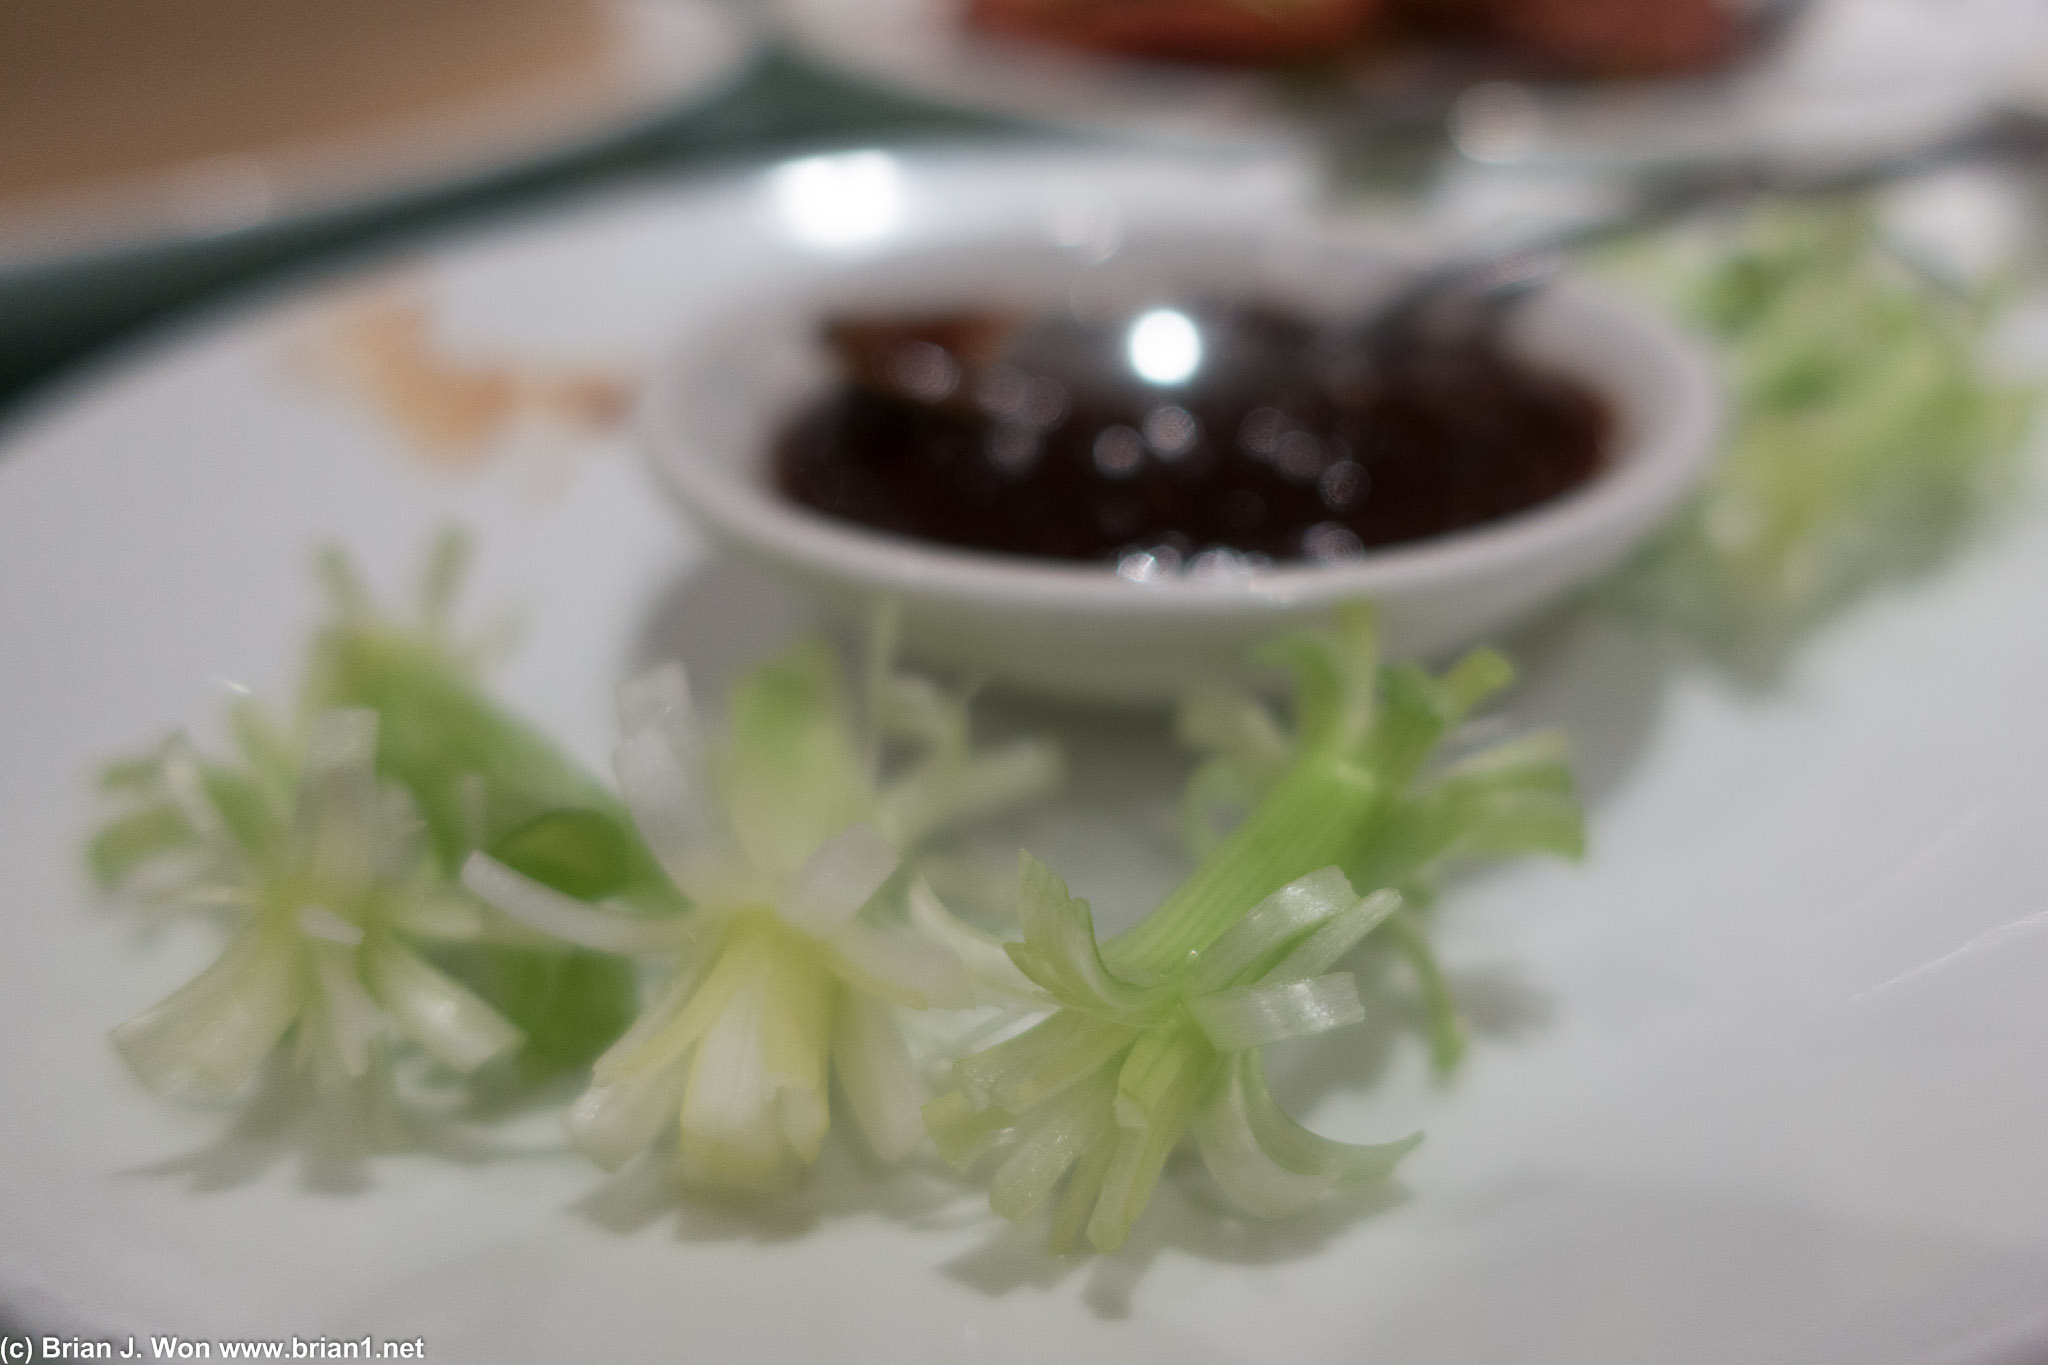 So fancy, they flowered the ends of the green onion.